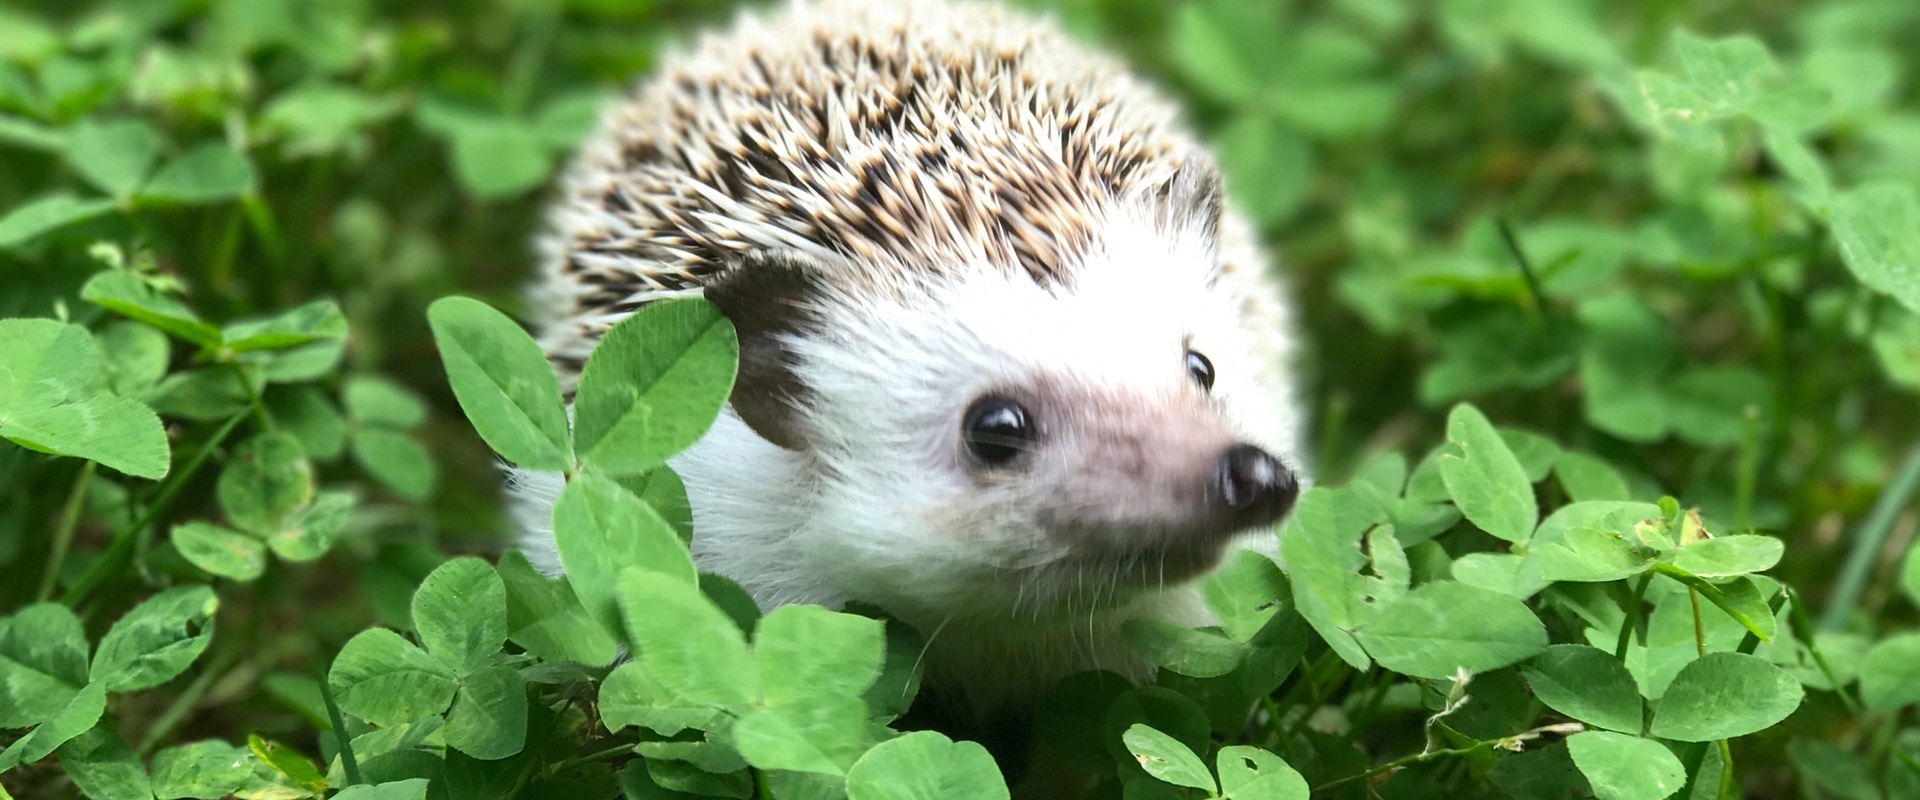 A hedgehog in a field of clovers